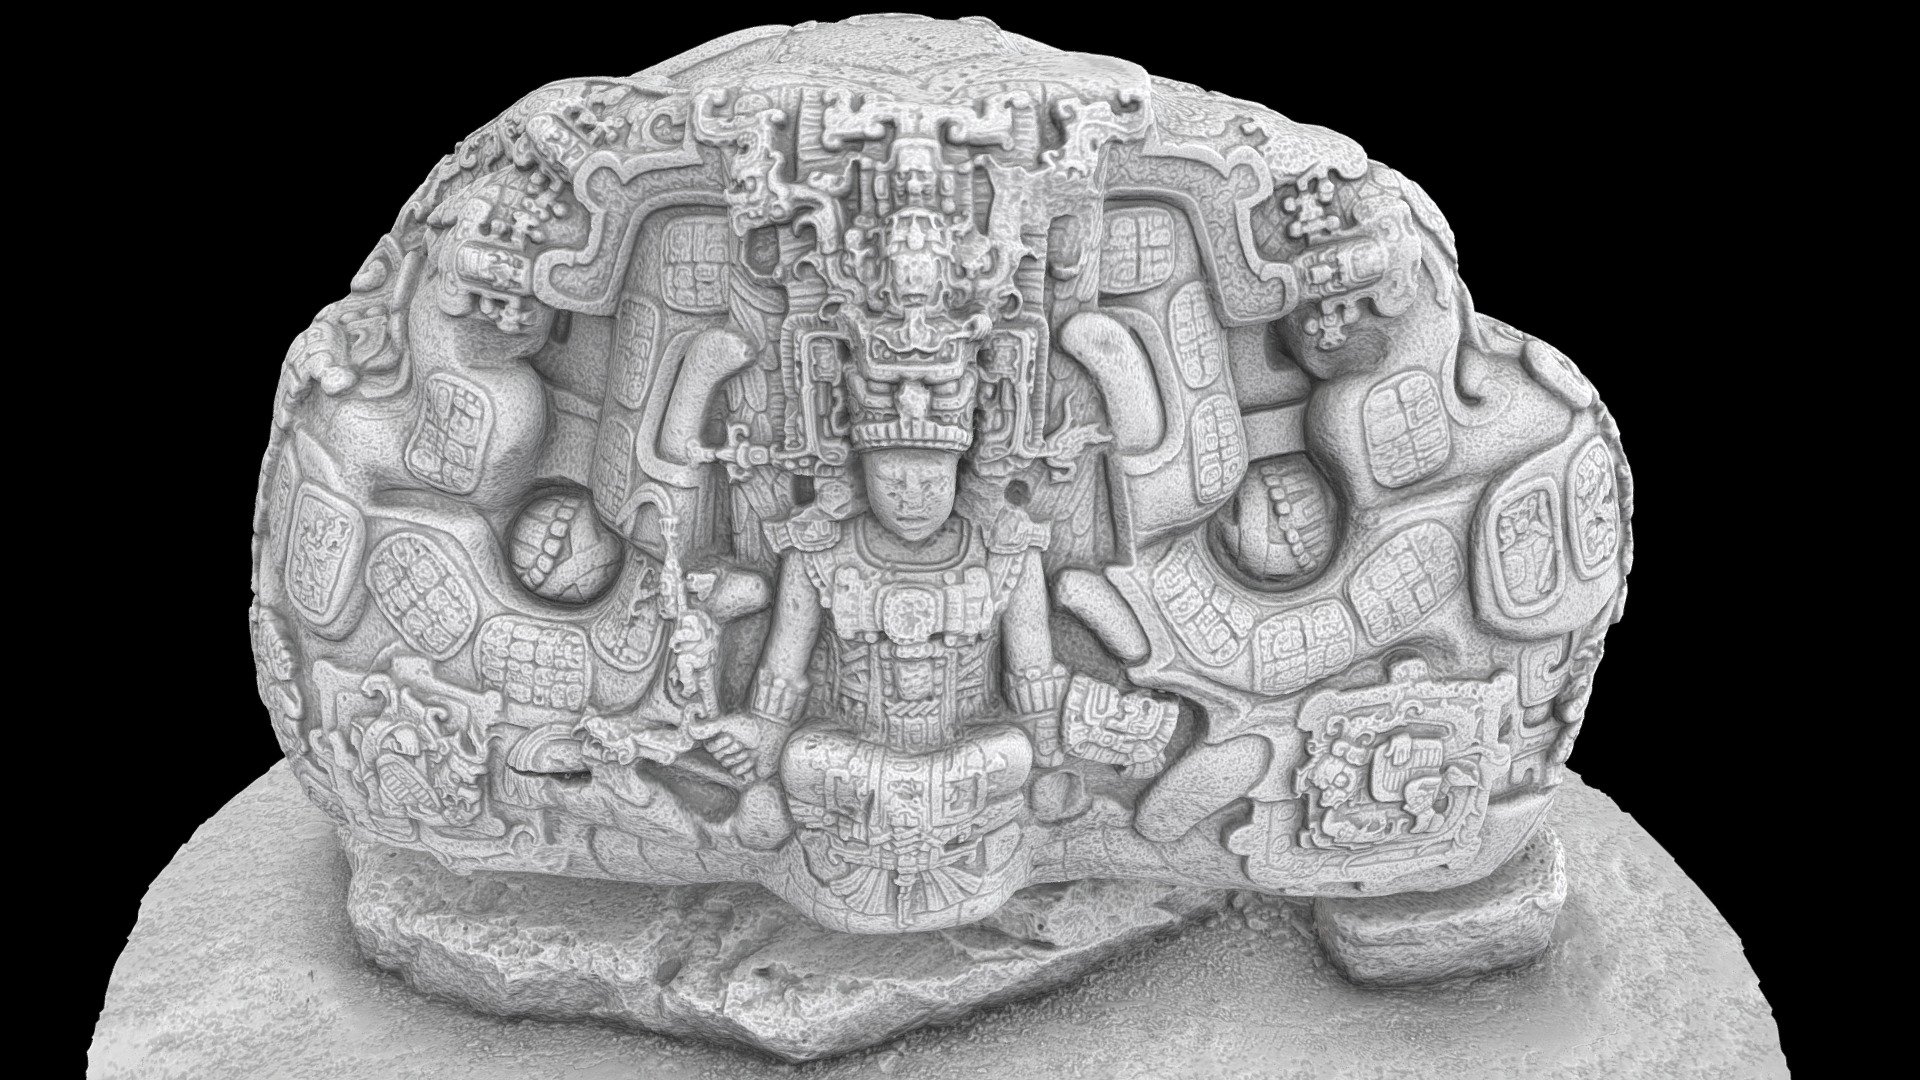 This ornately carved sandstone monument, said to weigh 20 tons and standing 2 meters high, is at the Archaeological Park and Ruins of Quiriguá, an inscribed UNESCO World Heritage Site in the Department of Izabal, Guatemala. The piece was 3D laser scanned in 2019 during our extensive documentation survey at the site by our USF Libraries DHHC team. We utilized structured light scanners at various sub-millimetric resolutions on this monument. Besides the rich iconography carved on this ceremonial throne, the text in the cartouches describe the founding of the Quiriguá dynasty (see also Matthew Looper's Quirigua: A Guide to an Ancient Maya City, 2007 for discussion and additional references). For more on our project: [https://dhhc.lib.usf.edu/project/the-quirigua-3d-project/]. Project in collaboration with Oswaldo Gomez, Administrador at Parque Arqueológico Quiriguá 3d model